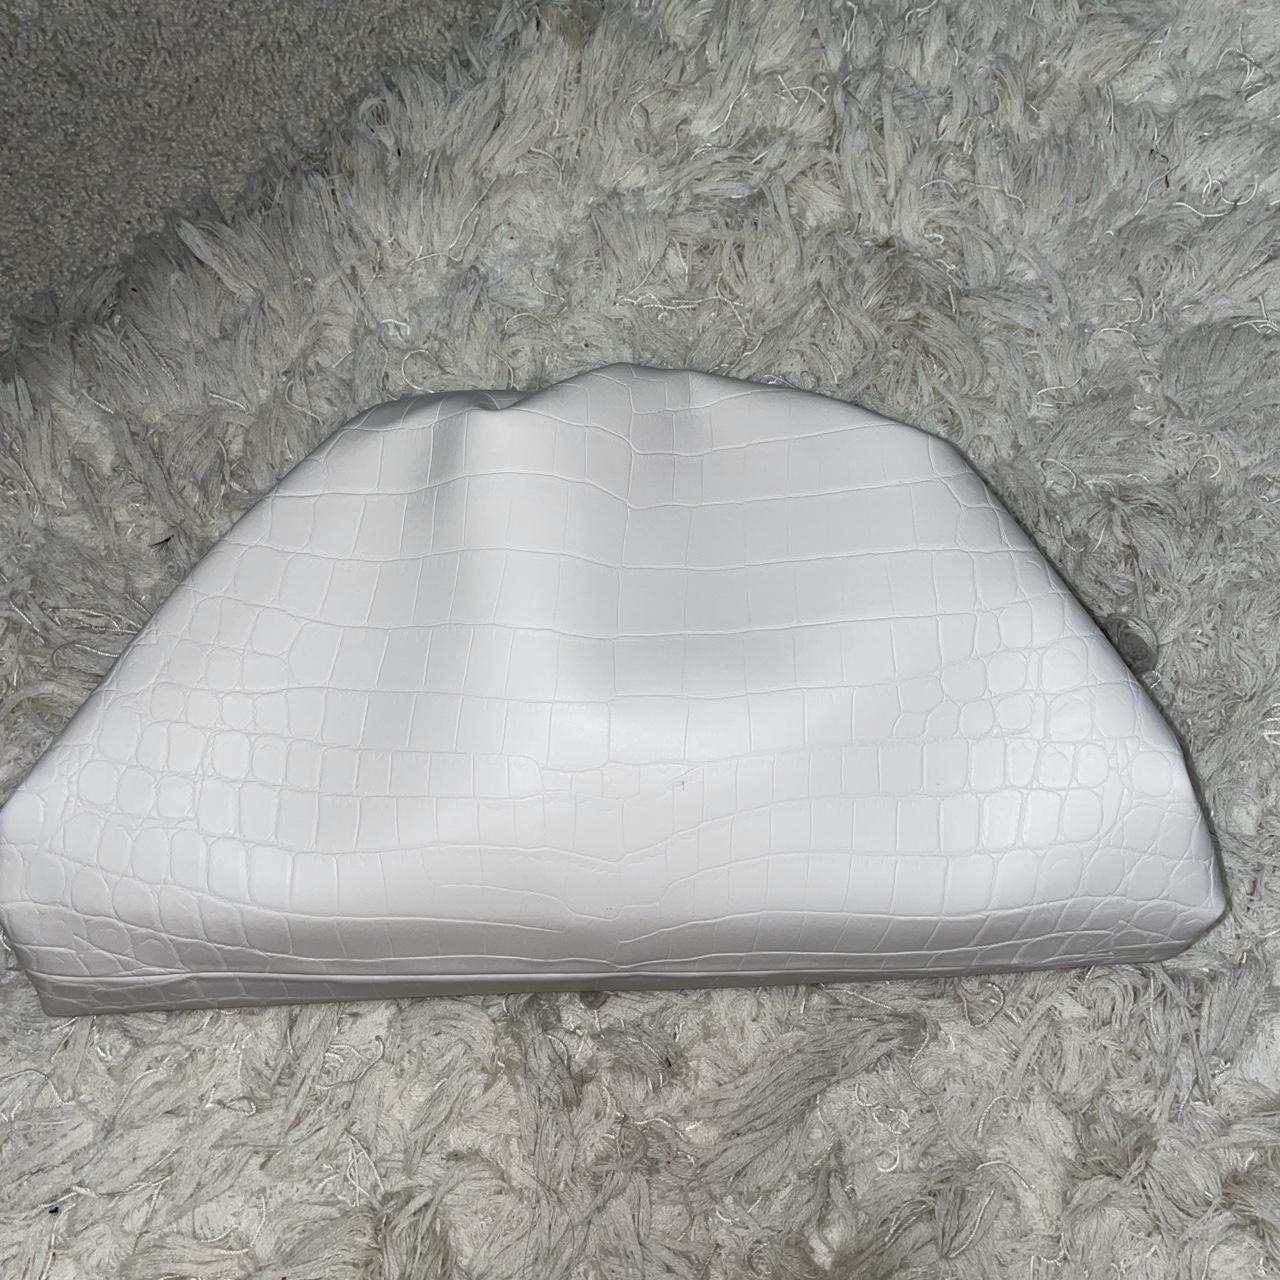 Product Image 2 - Croc clutch (as seen on